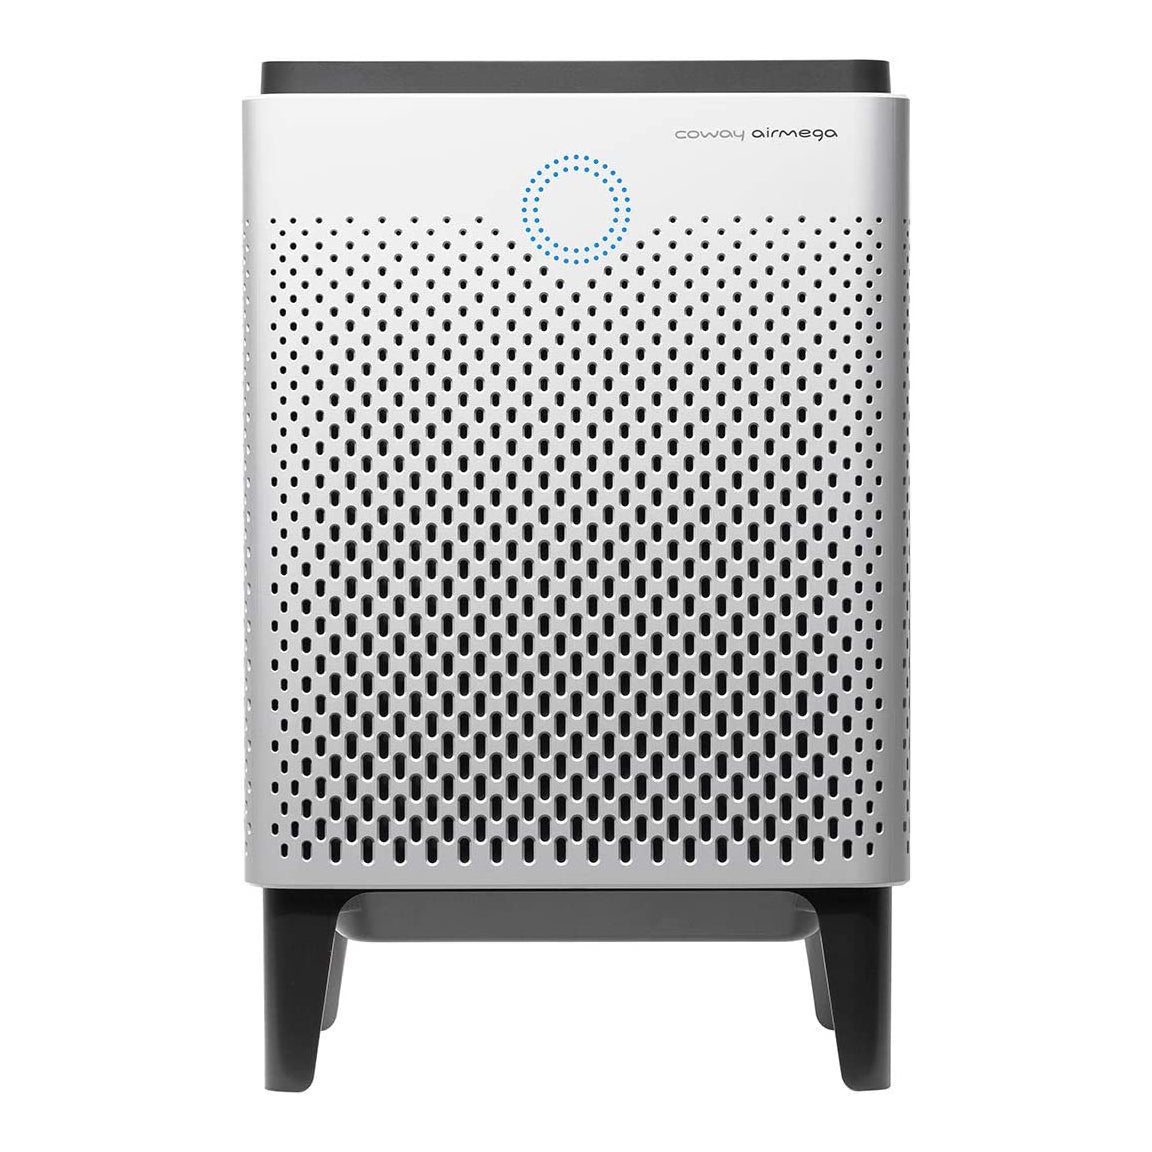 Coway Airmega 400 Smart Air Purifier with Smart Technology